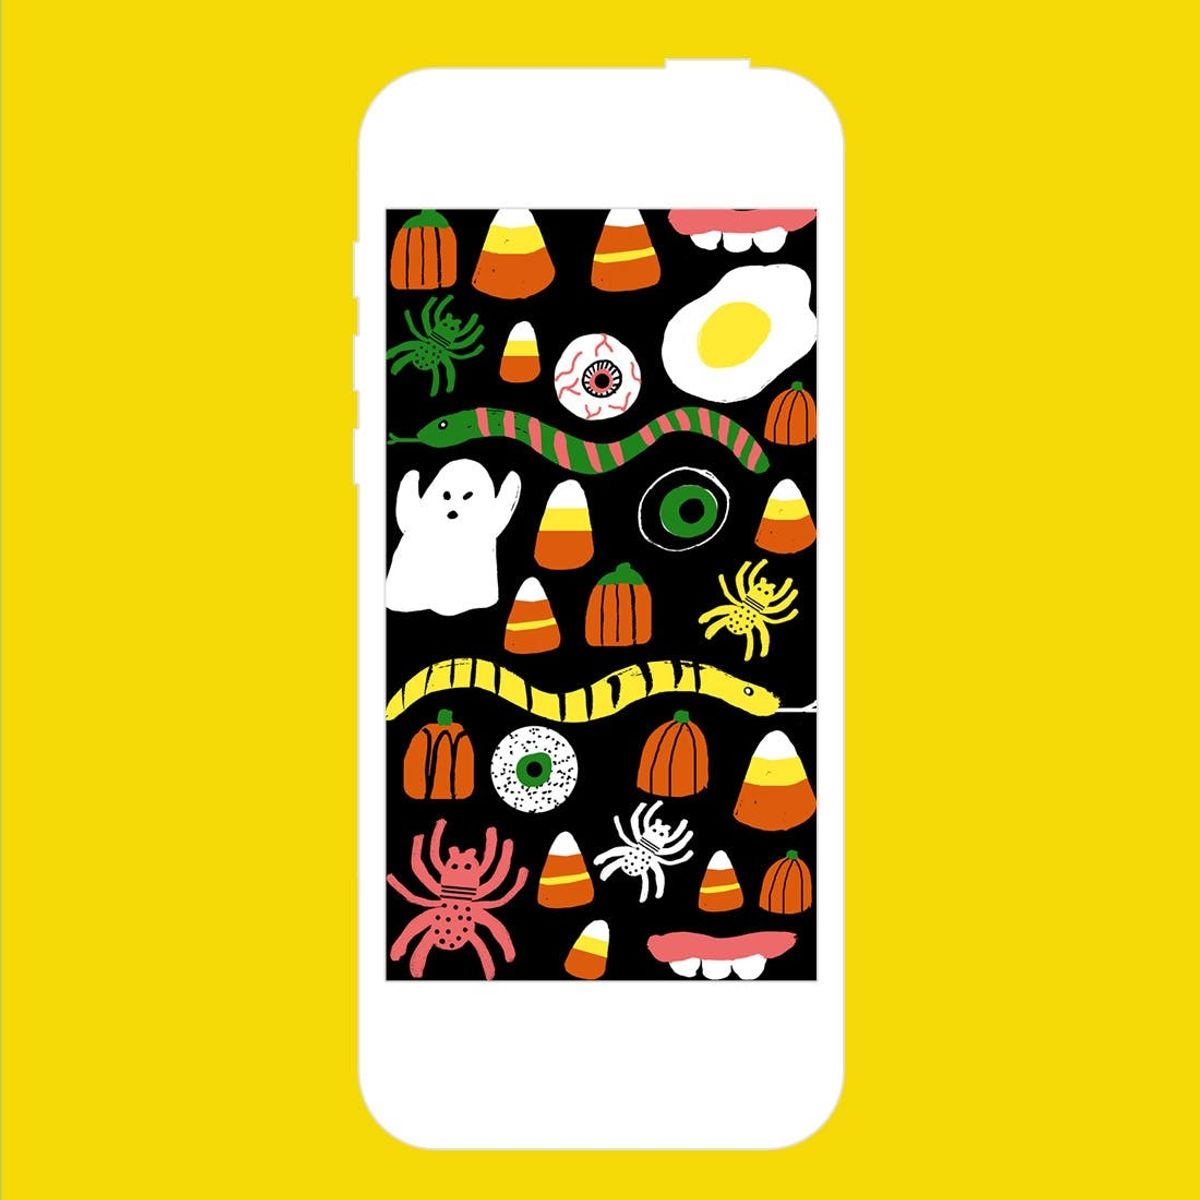 Download Now: 3 Spooky, Scary and Totally Cute Desktop and Smartphone Wallpapers